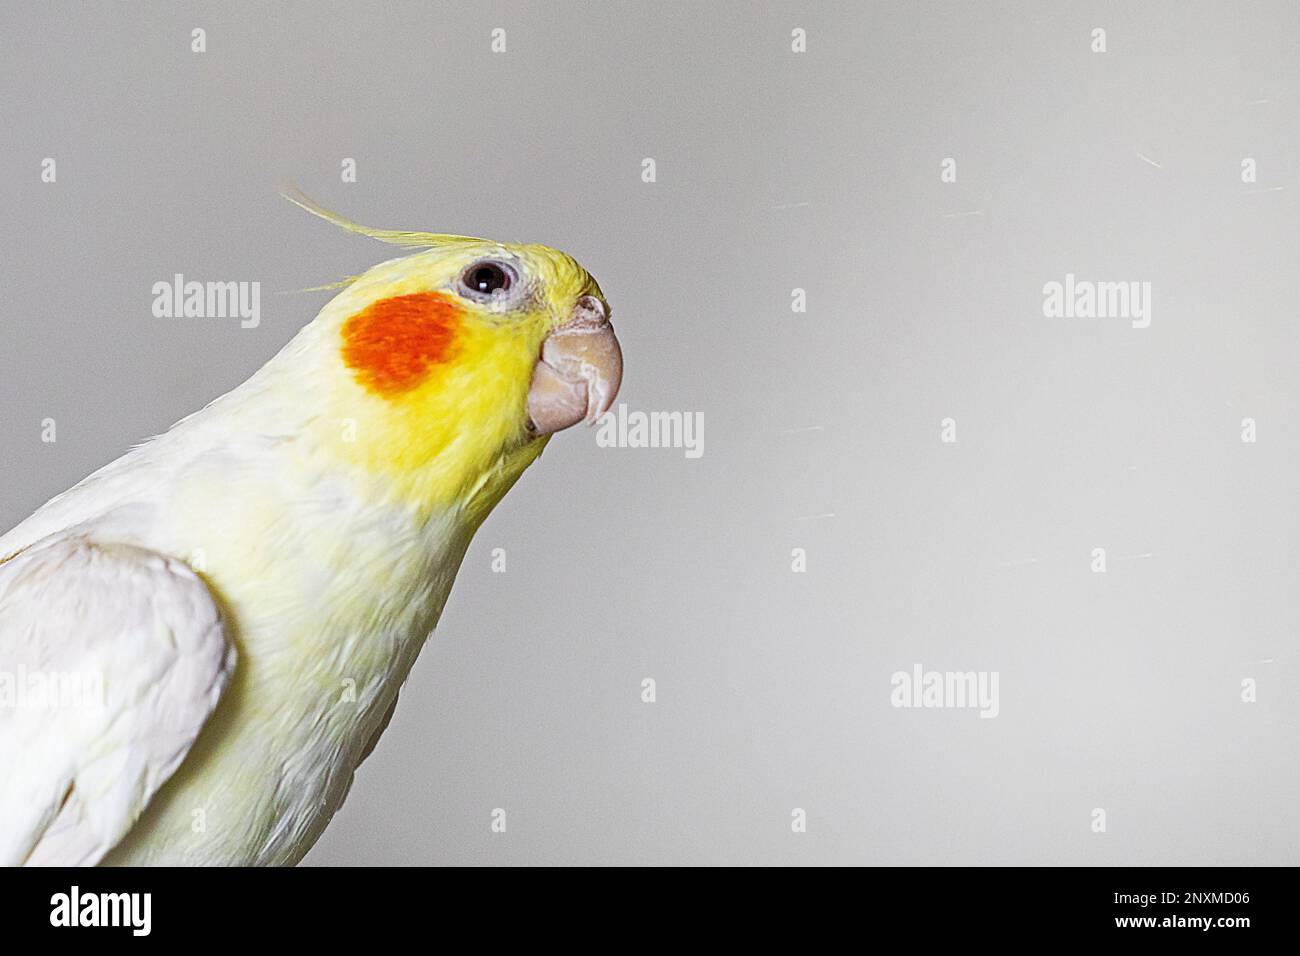 funny cockatiel parrot looks with his head tilted on a light background Stock Photo